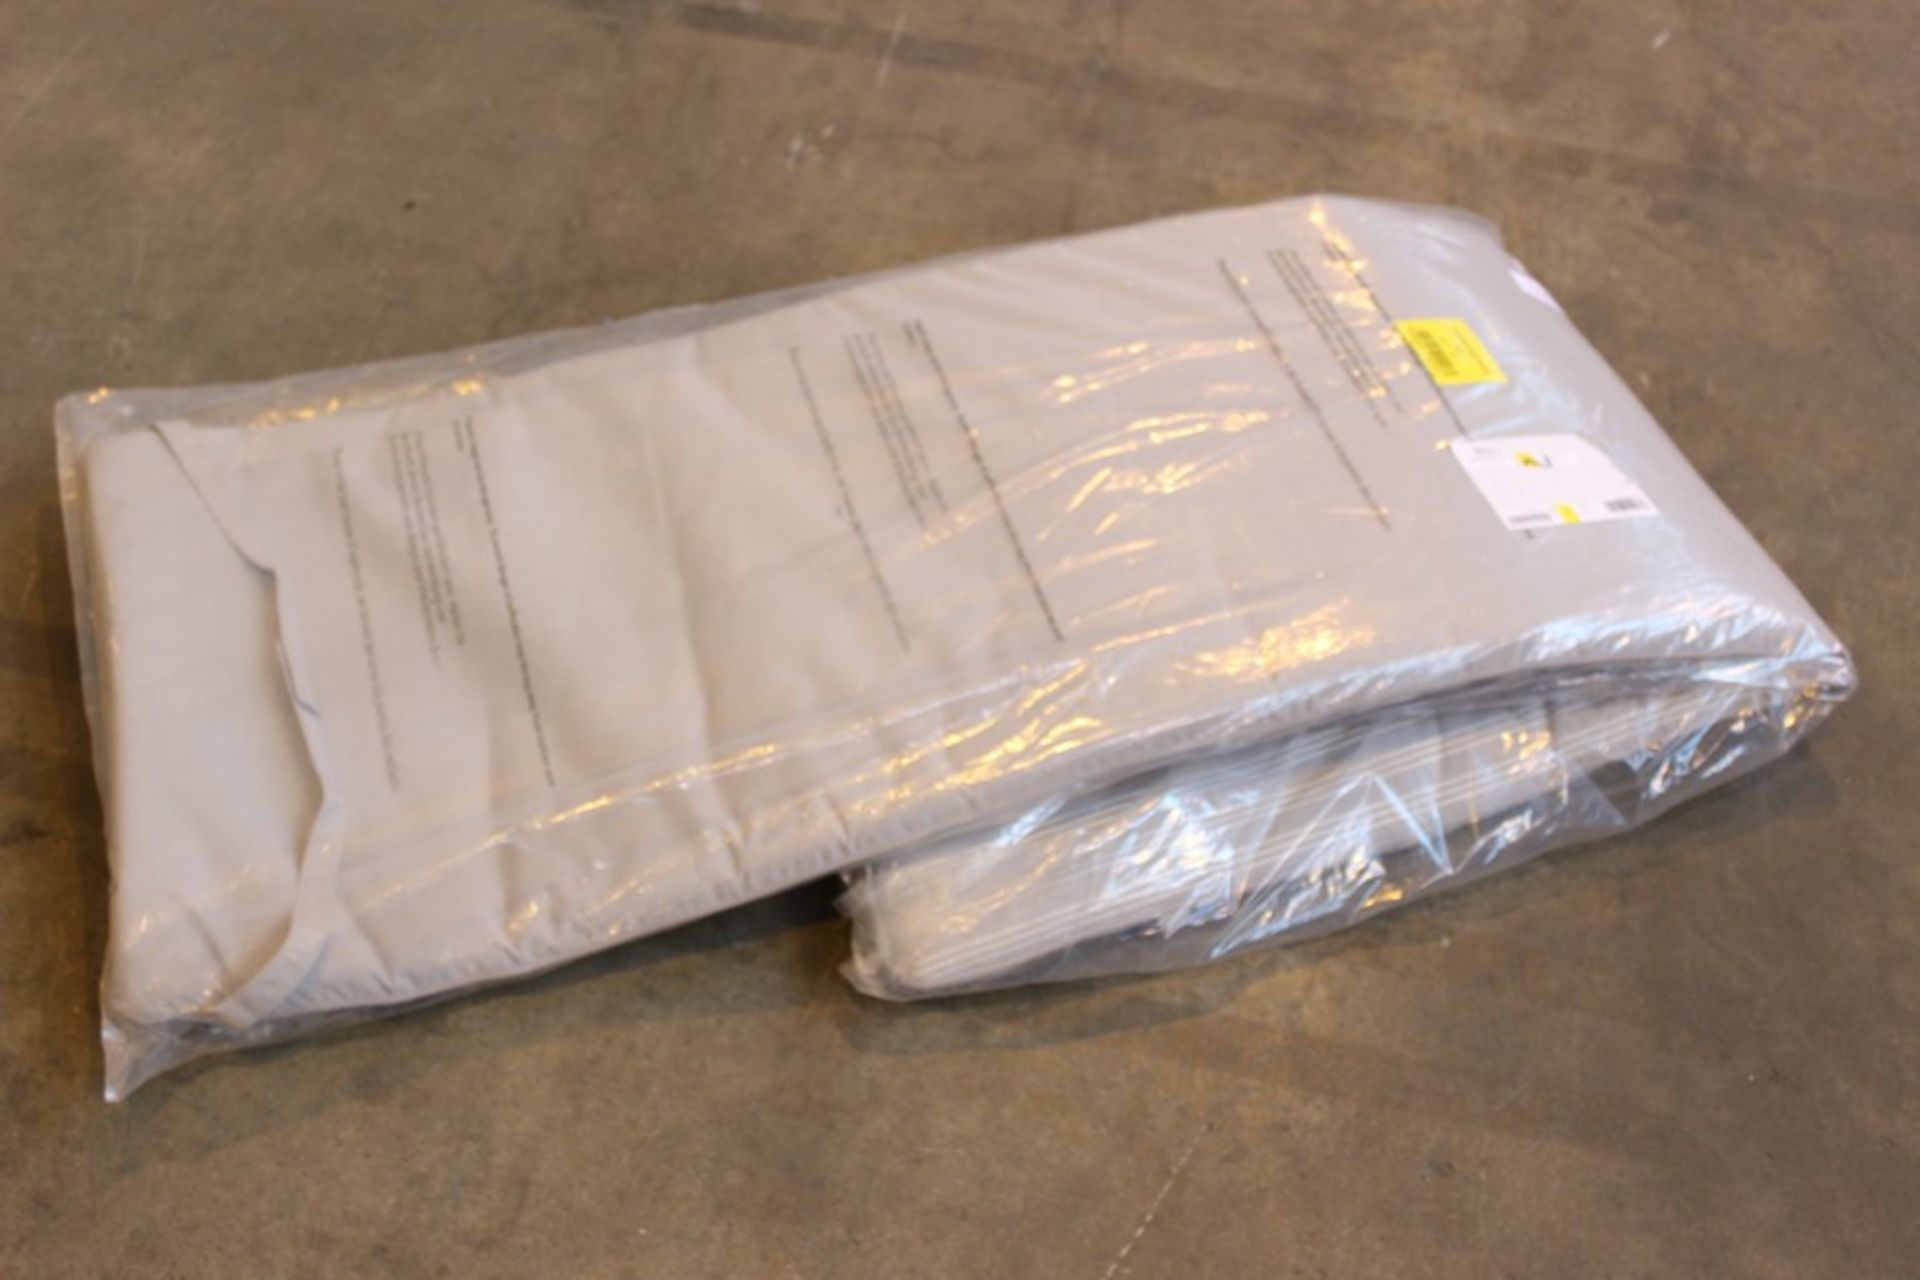 1 x HENLEY LOUNGER WATERPROOF CUSHION IN GREY (583695)(13.5.15)  *PLEASE NOTE THAT THE BID PRICE